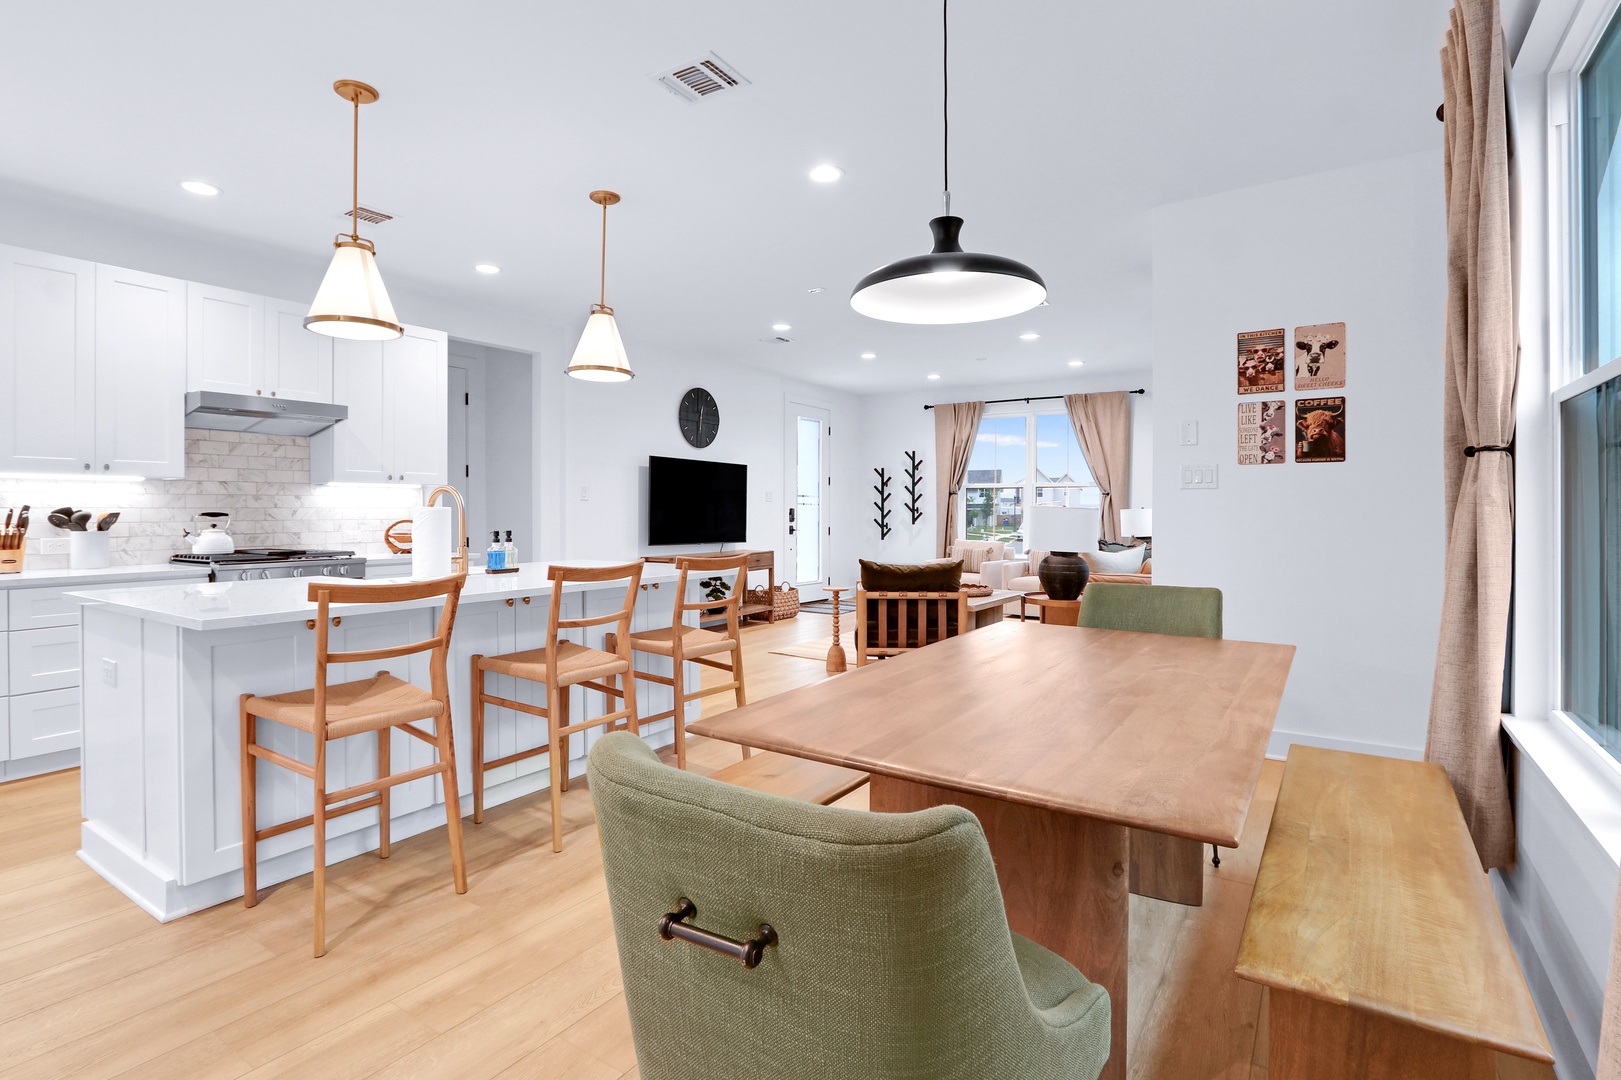 Gather for meals together at the dining table or sip coffee at the kitchen island